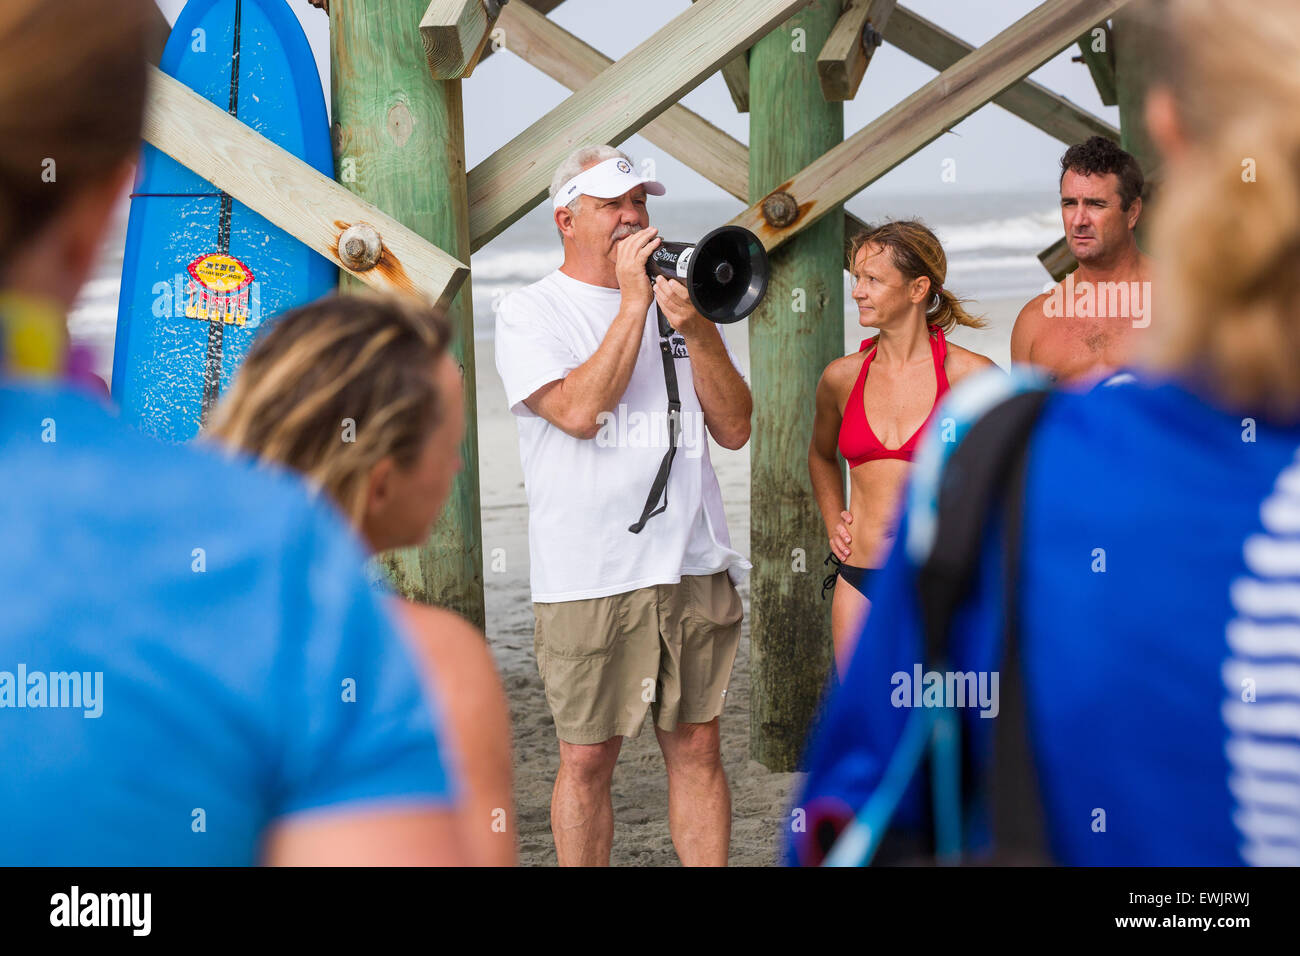 Folly beach, South Carolina, USA. 27th June, 2015. Folly Beach Mayor Tim Goodwin addresses surfers gathered for a traditional memorial paddle out to honor and remember the nine people killed at the historic mother Emanuel African Methodist Episcopal Church June 27, 2015 in Folly Beach, South Carolina. Earlier in the week a white supremacist gunman killed 9 members at the historically black church. Stock Photo